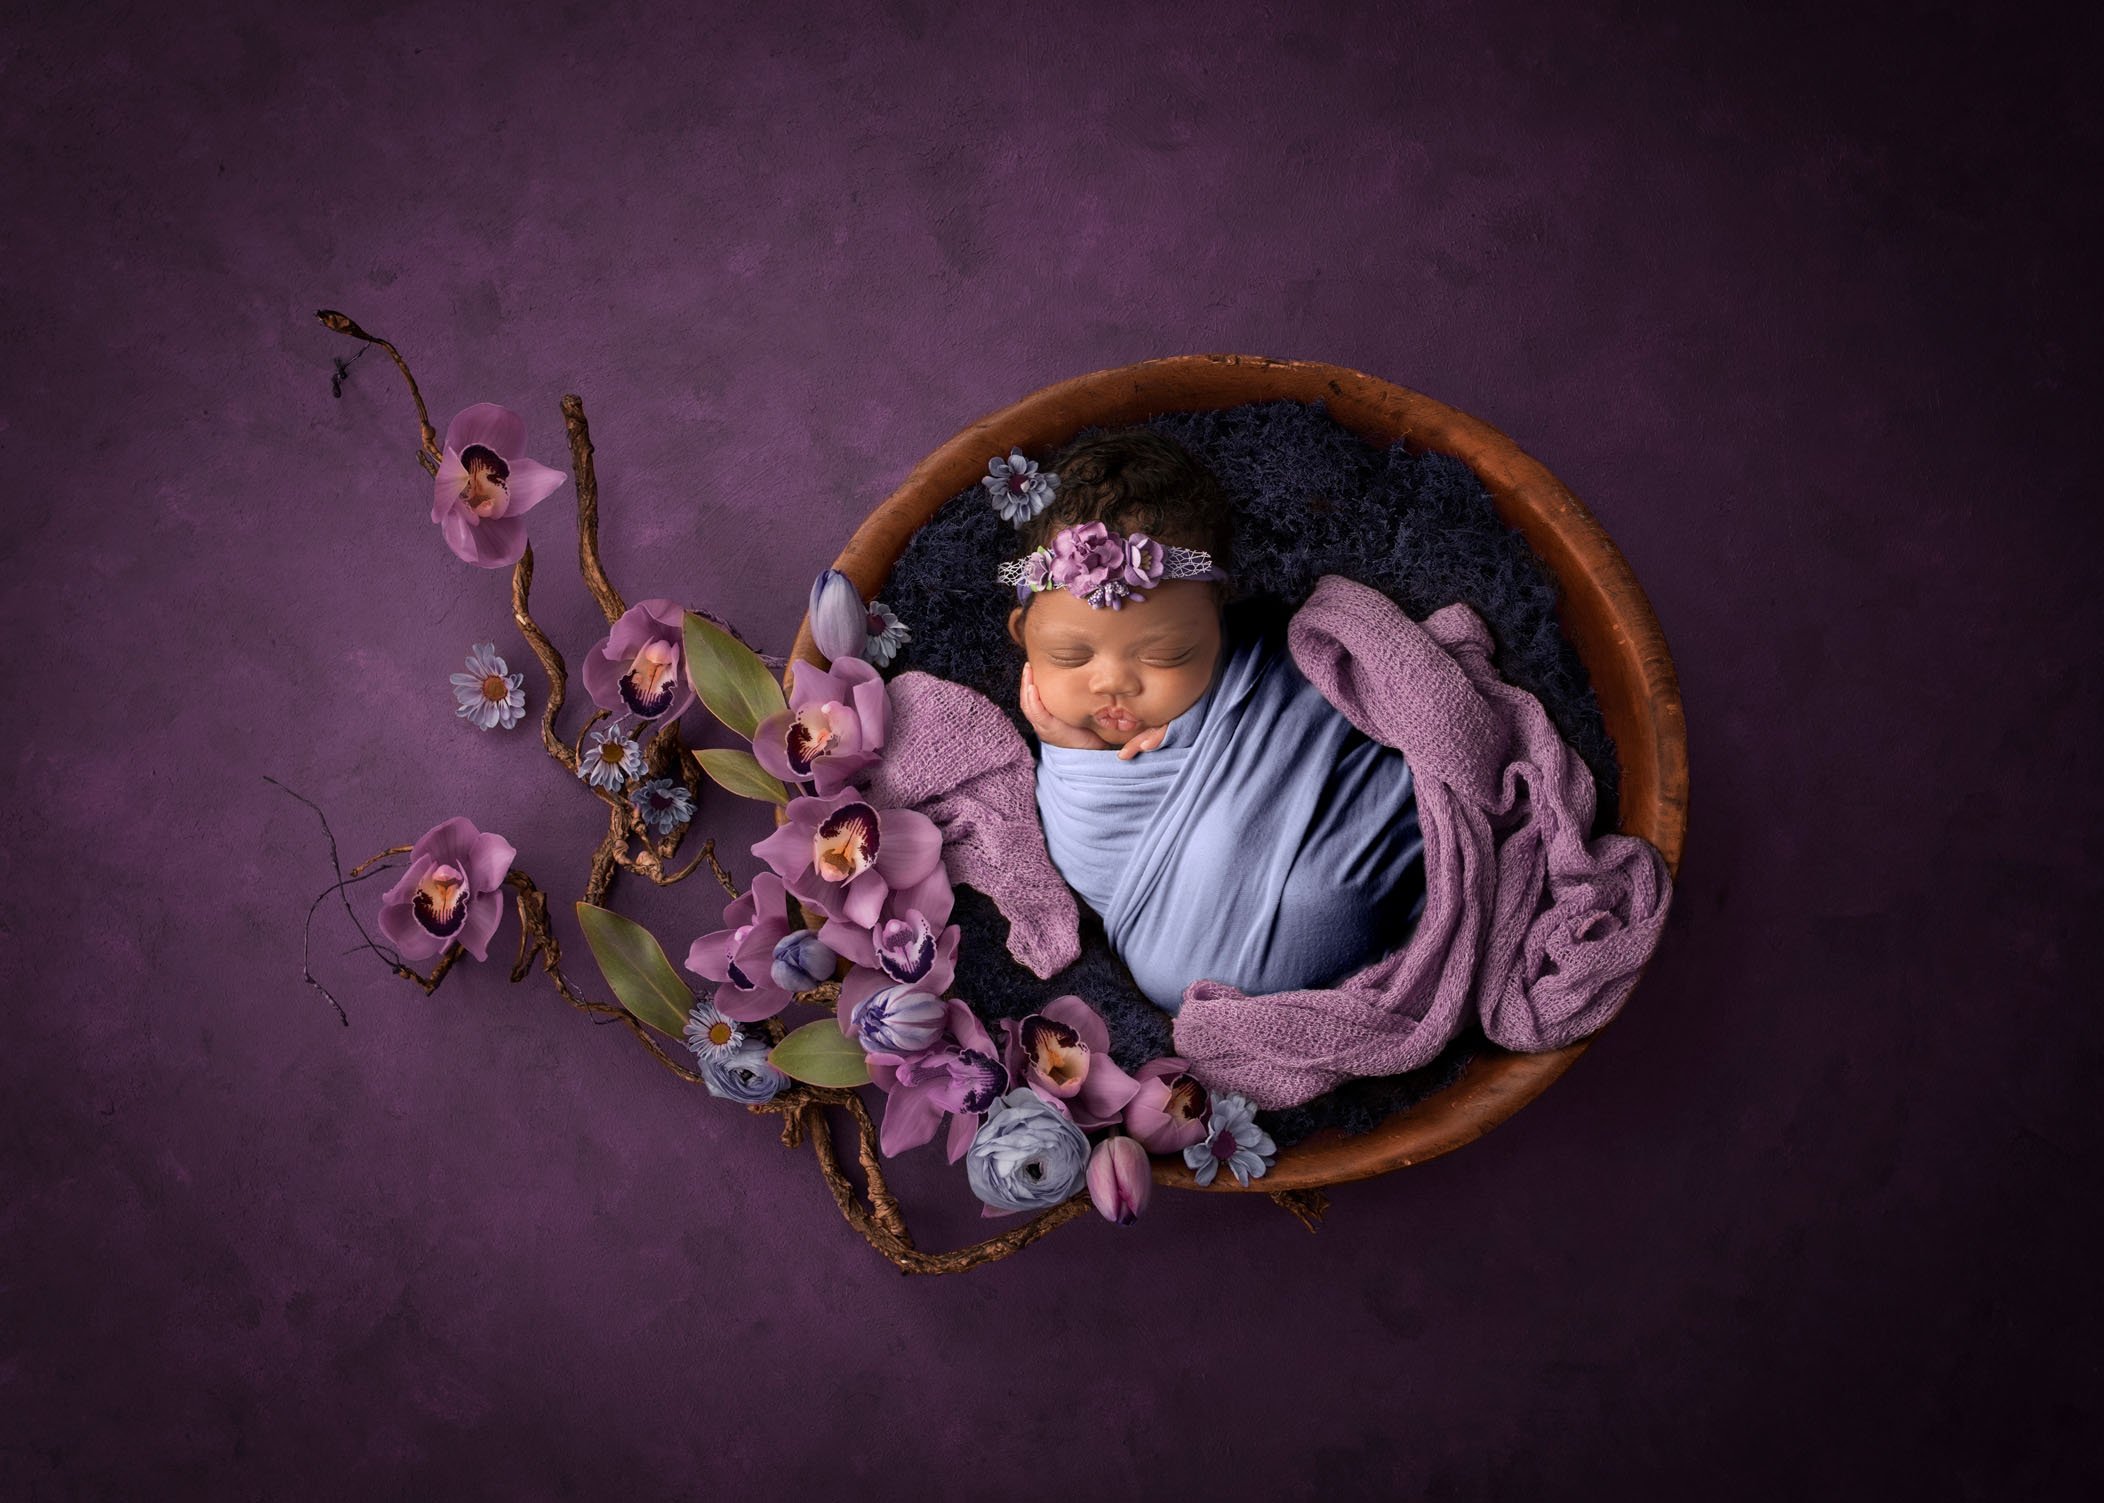 african-american newborn baby girl asleep in a bowl on a purple backdrop with purple orchids surrounding her